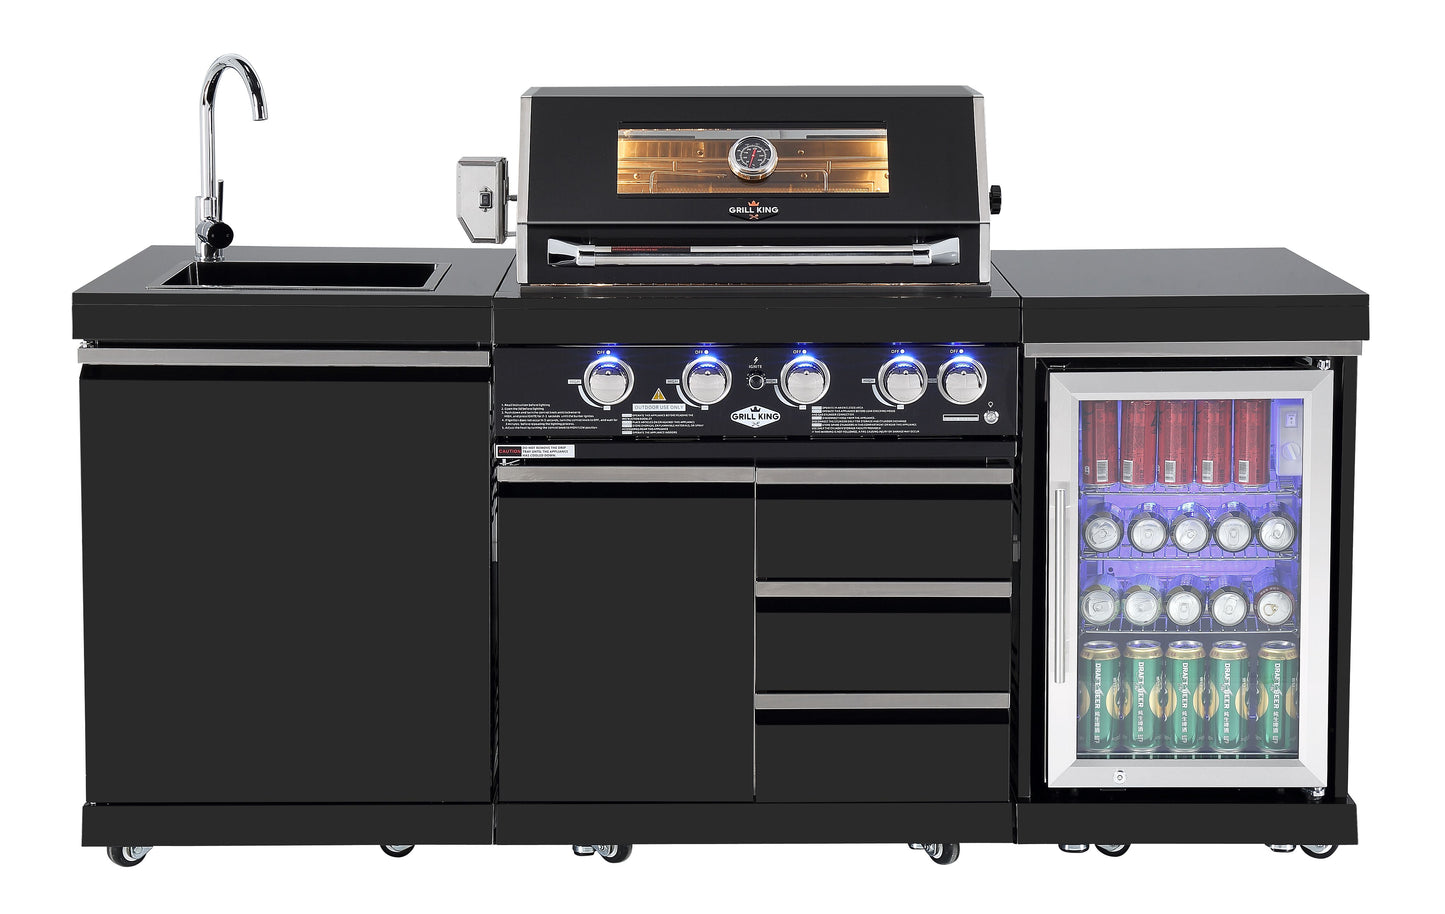 Black Stainless Steel Non Wok BBQ Kitchen: Stone Bench, Fridge, Sink, Height Adjustable, Rotisserie with BBQ Cover